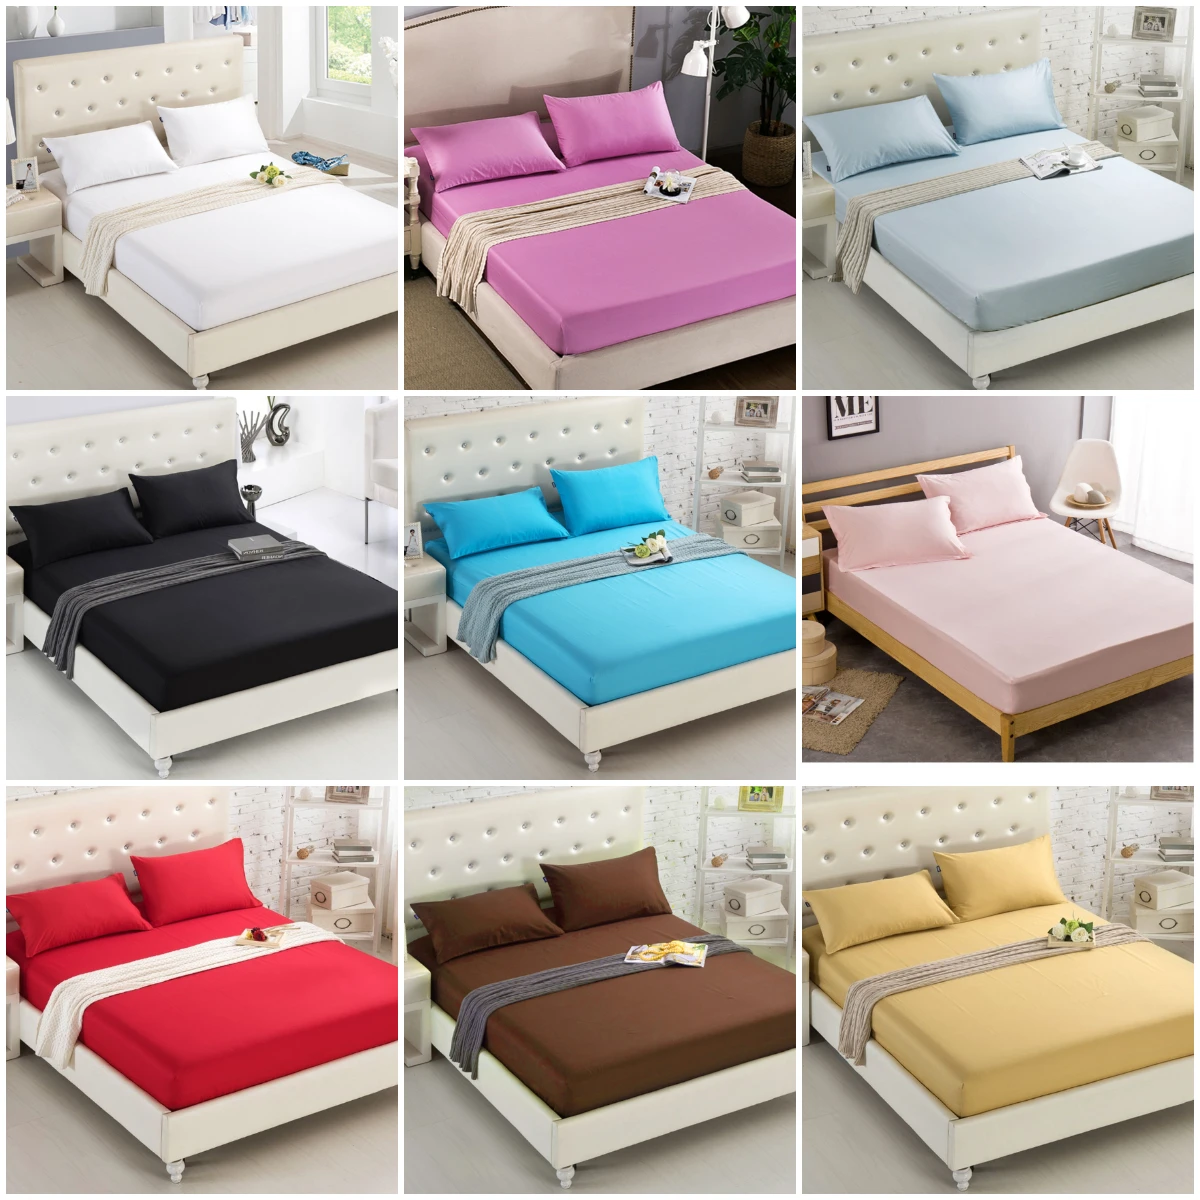 FULL SIZE FITTED SHEET FITTED SHEET FULL COTTON FITTED SHEETS BED SHEETS SHEETS 